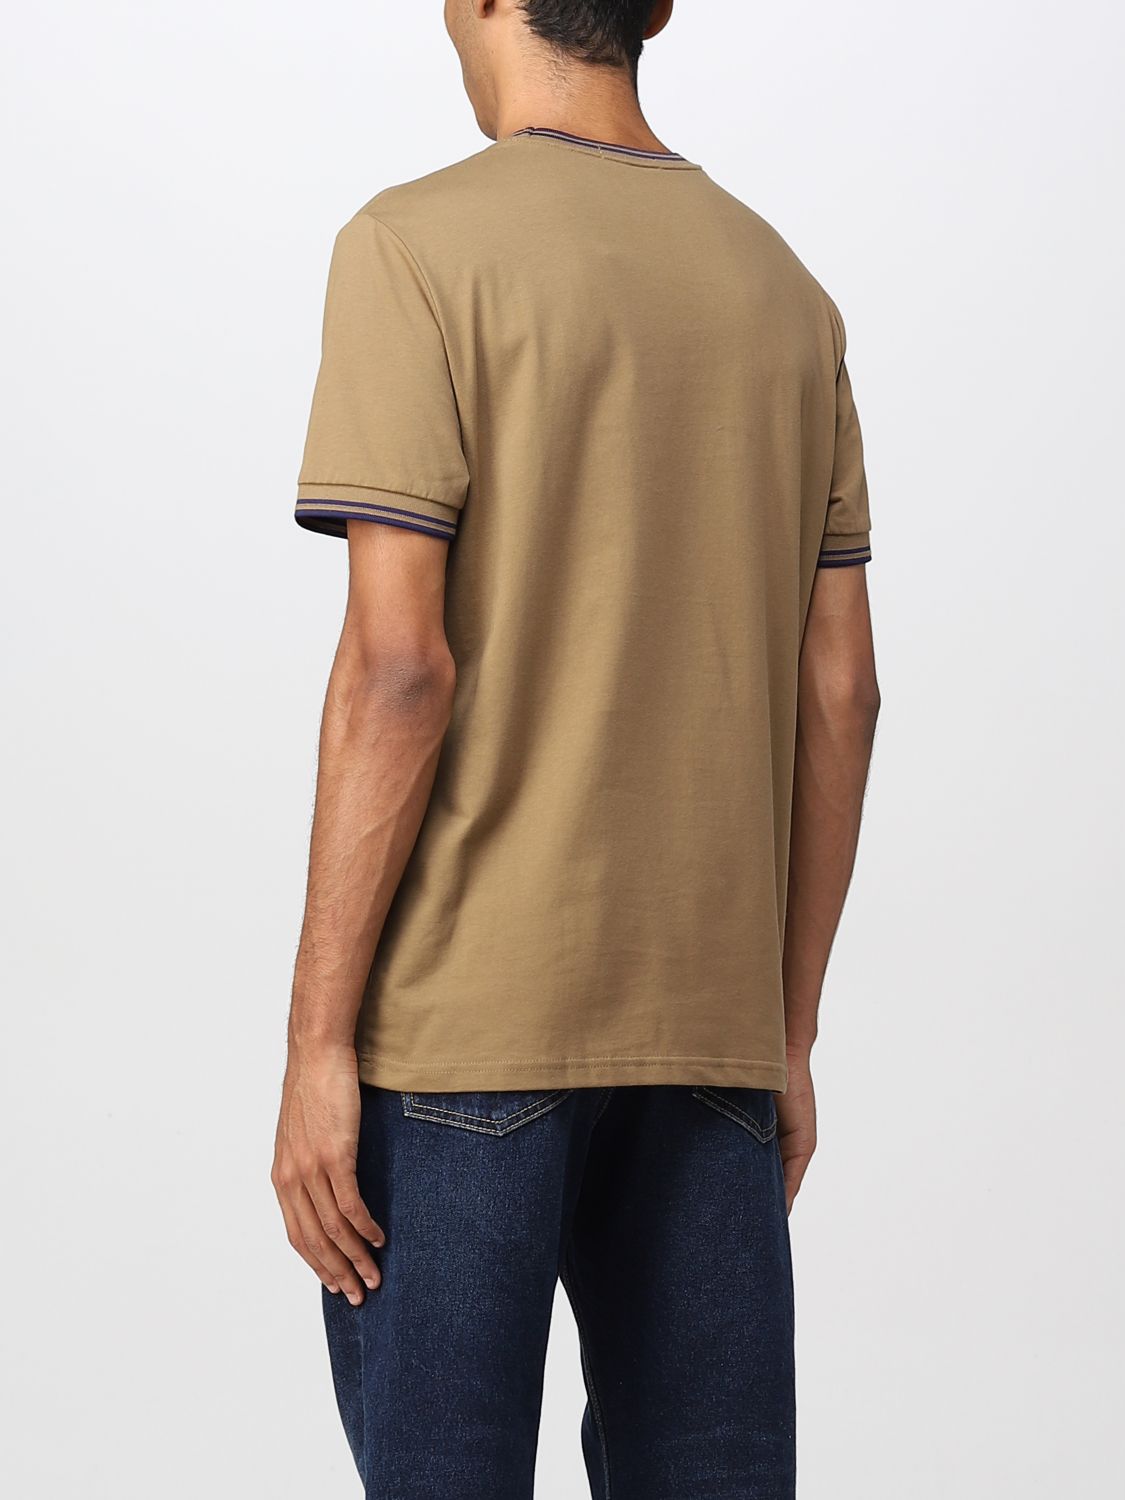 T-shirt Fred Perry: Fred Perry t-shirt for man brown 2